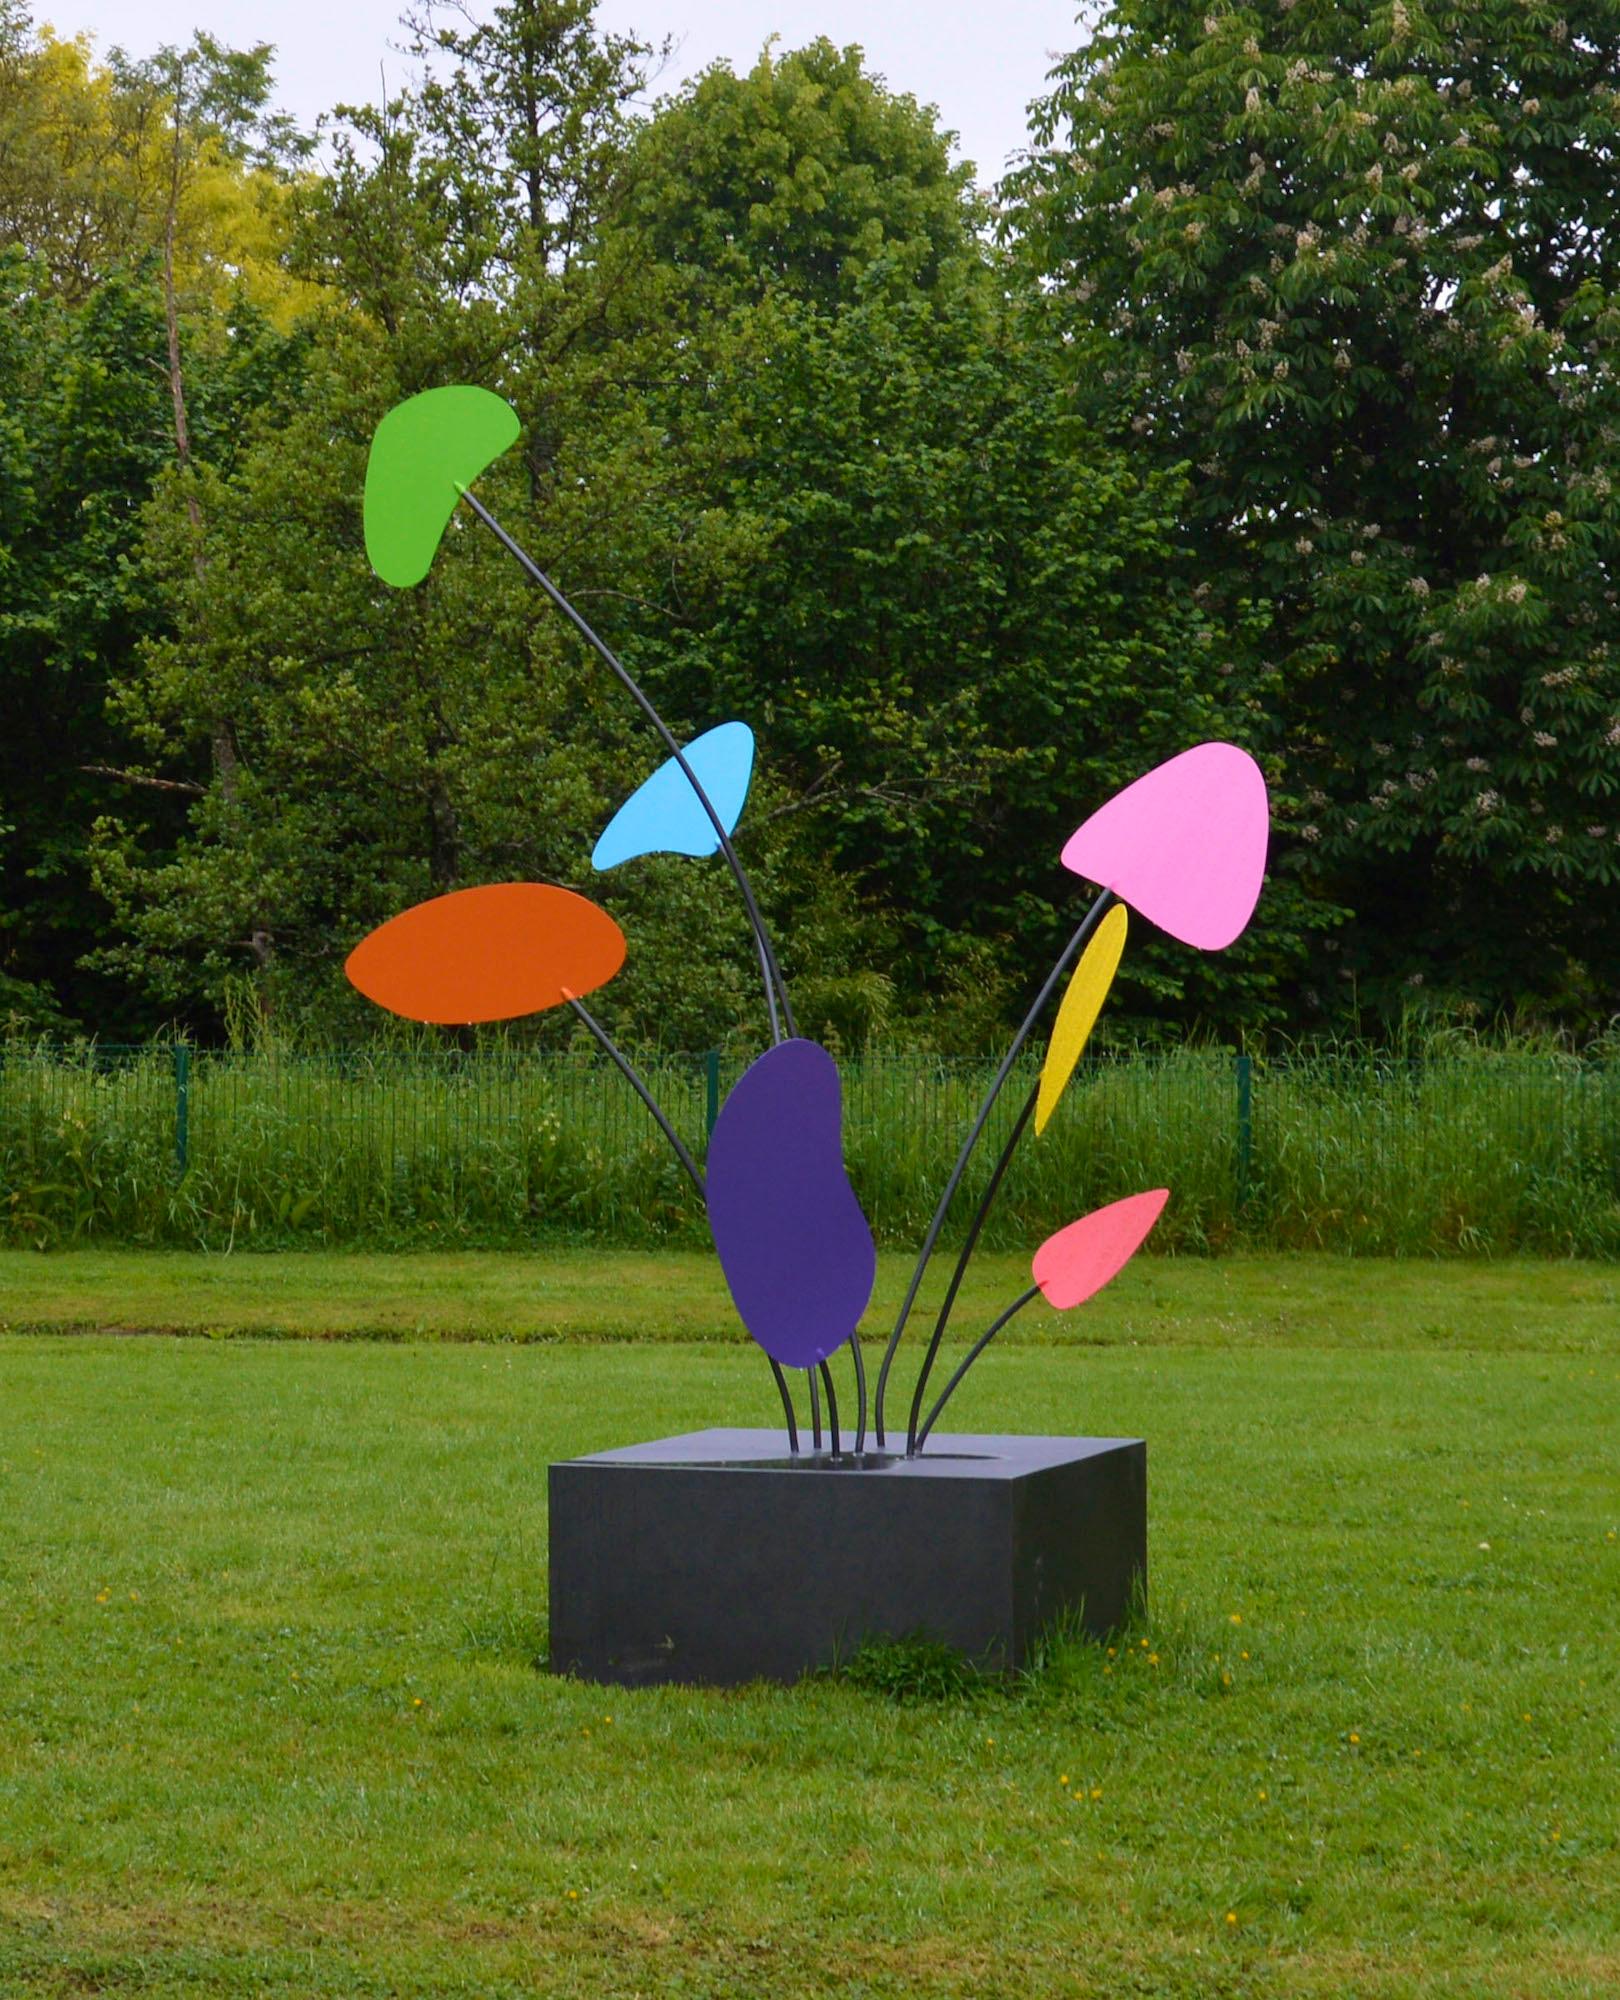 Stabile is a unique painted stainless steel stabile and base sculpture by contemporary artist Franck K, dimensions are 250 × 200 × 200 cm (98.4 × 78.7 × 78.7 in). 
The sculpture is signed and comes with a certificate of authenticity.
It is possible